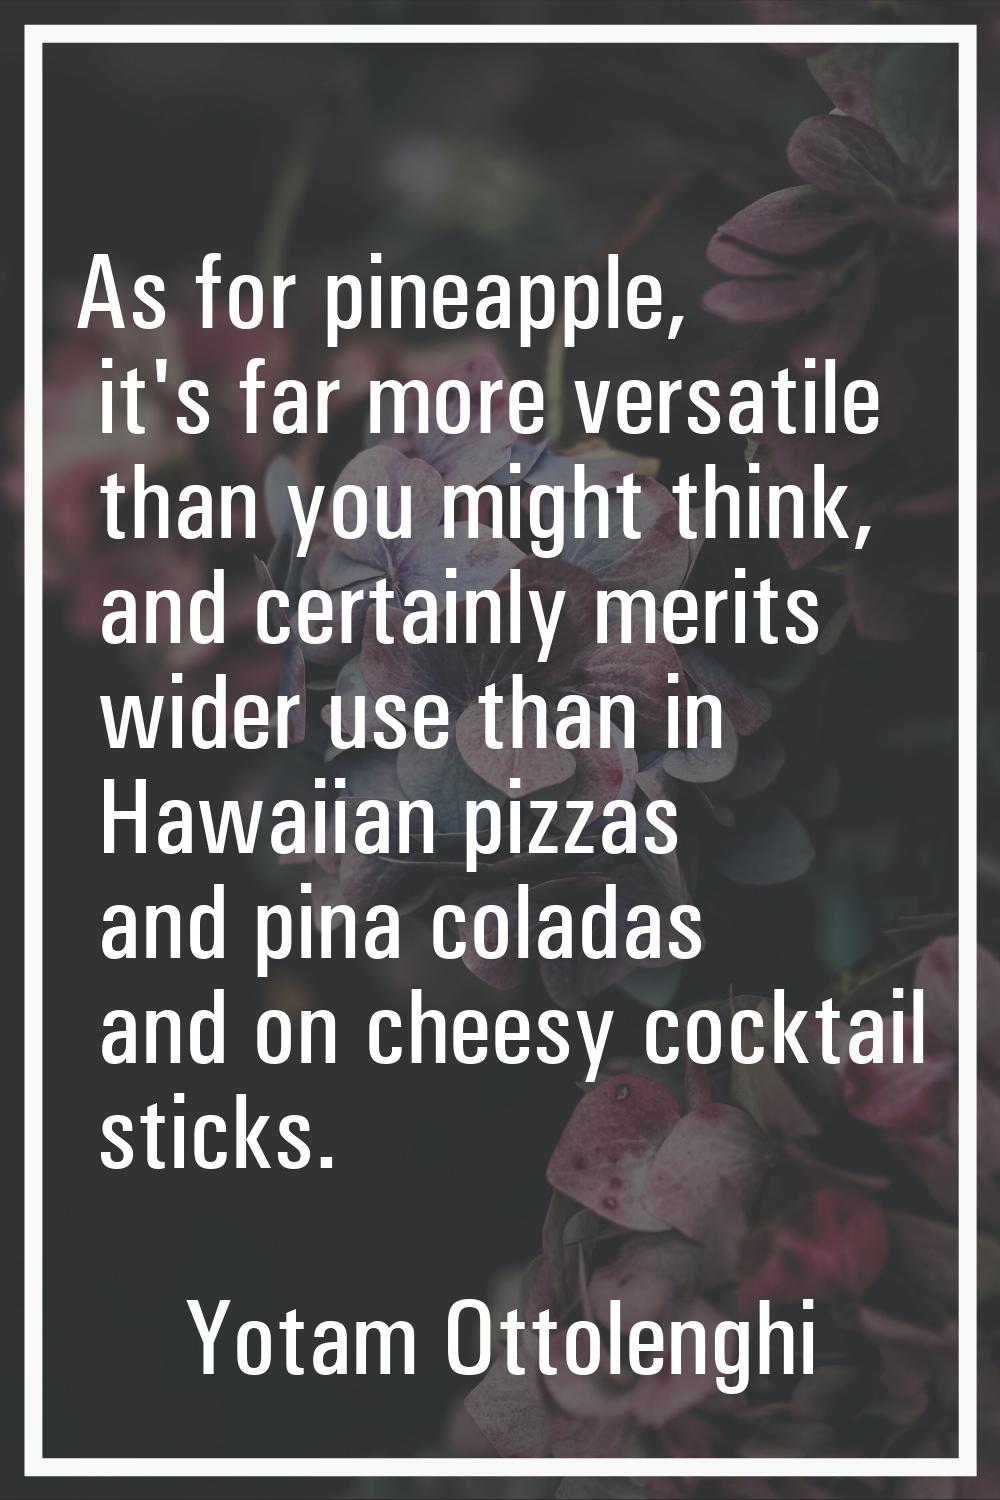 As for pineapple, it's far more versatile than you might think, and certainly merits wider use than